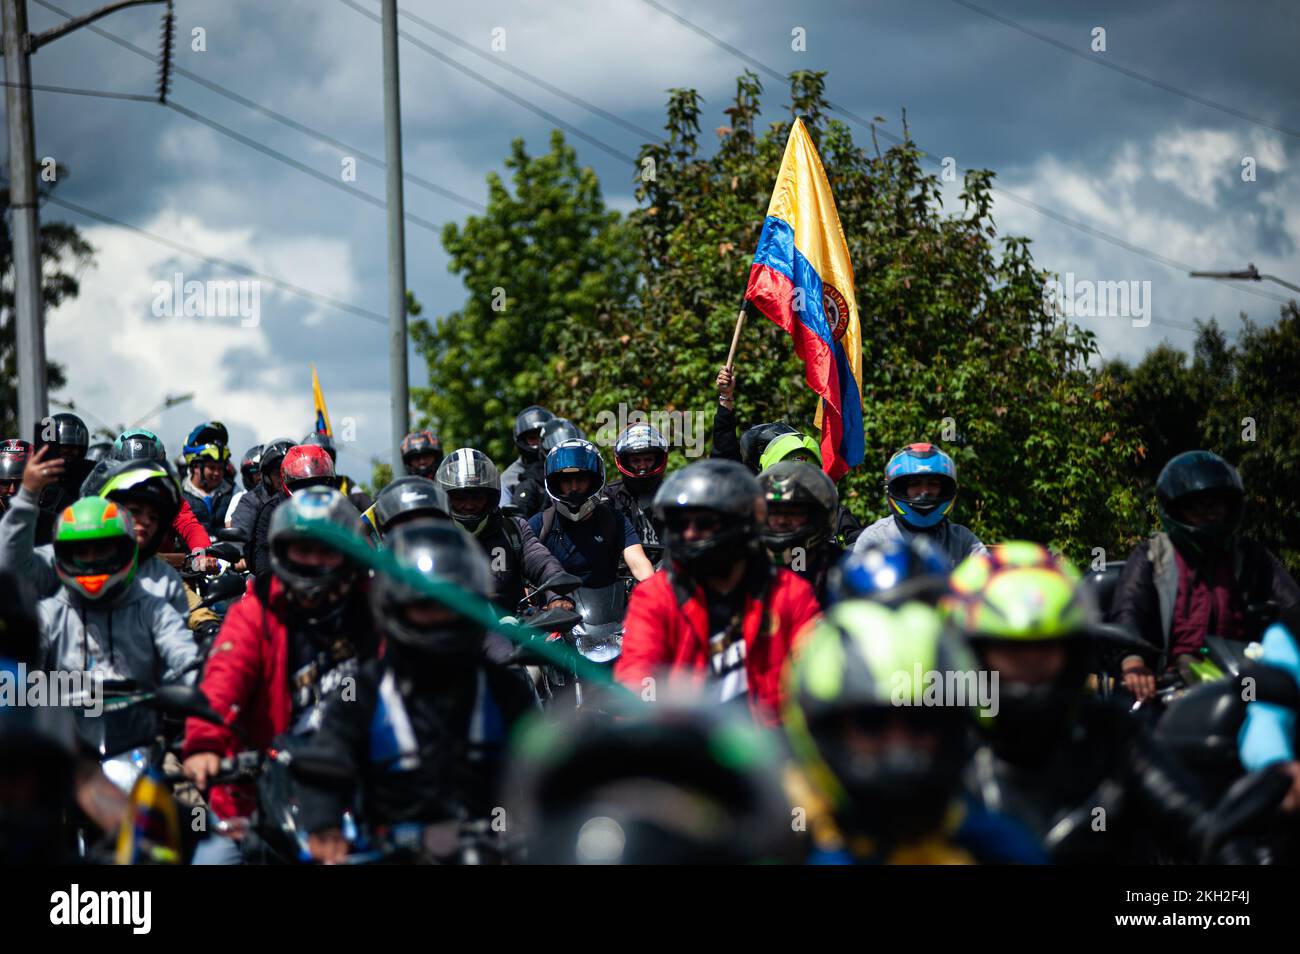 Bikers protest in Bogota, Colombia amid road security and prosecution for use of rideshare apps and road infrastrucutre, on November 23, 2022. Photo by: Chepa Beltran/Long Visual Press Stock Photo